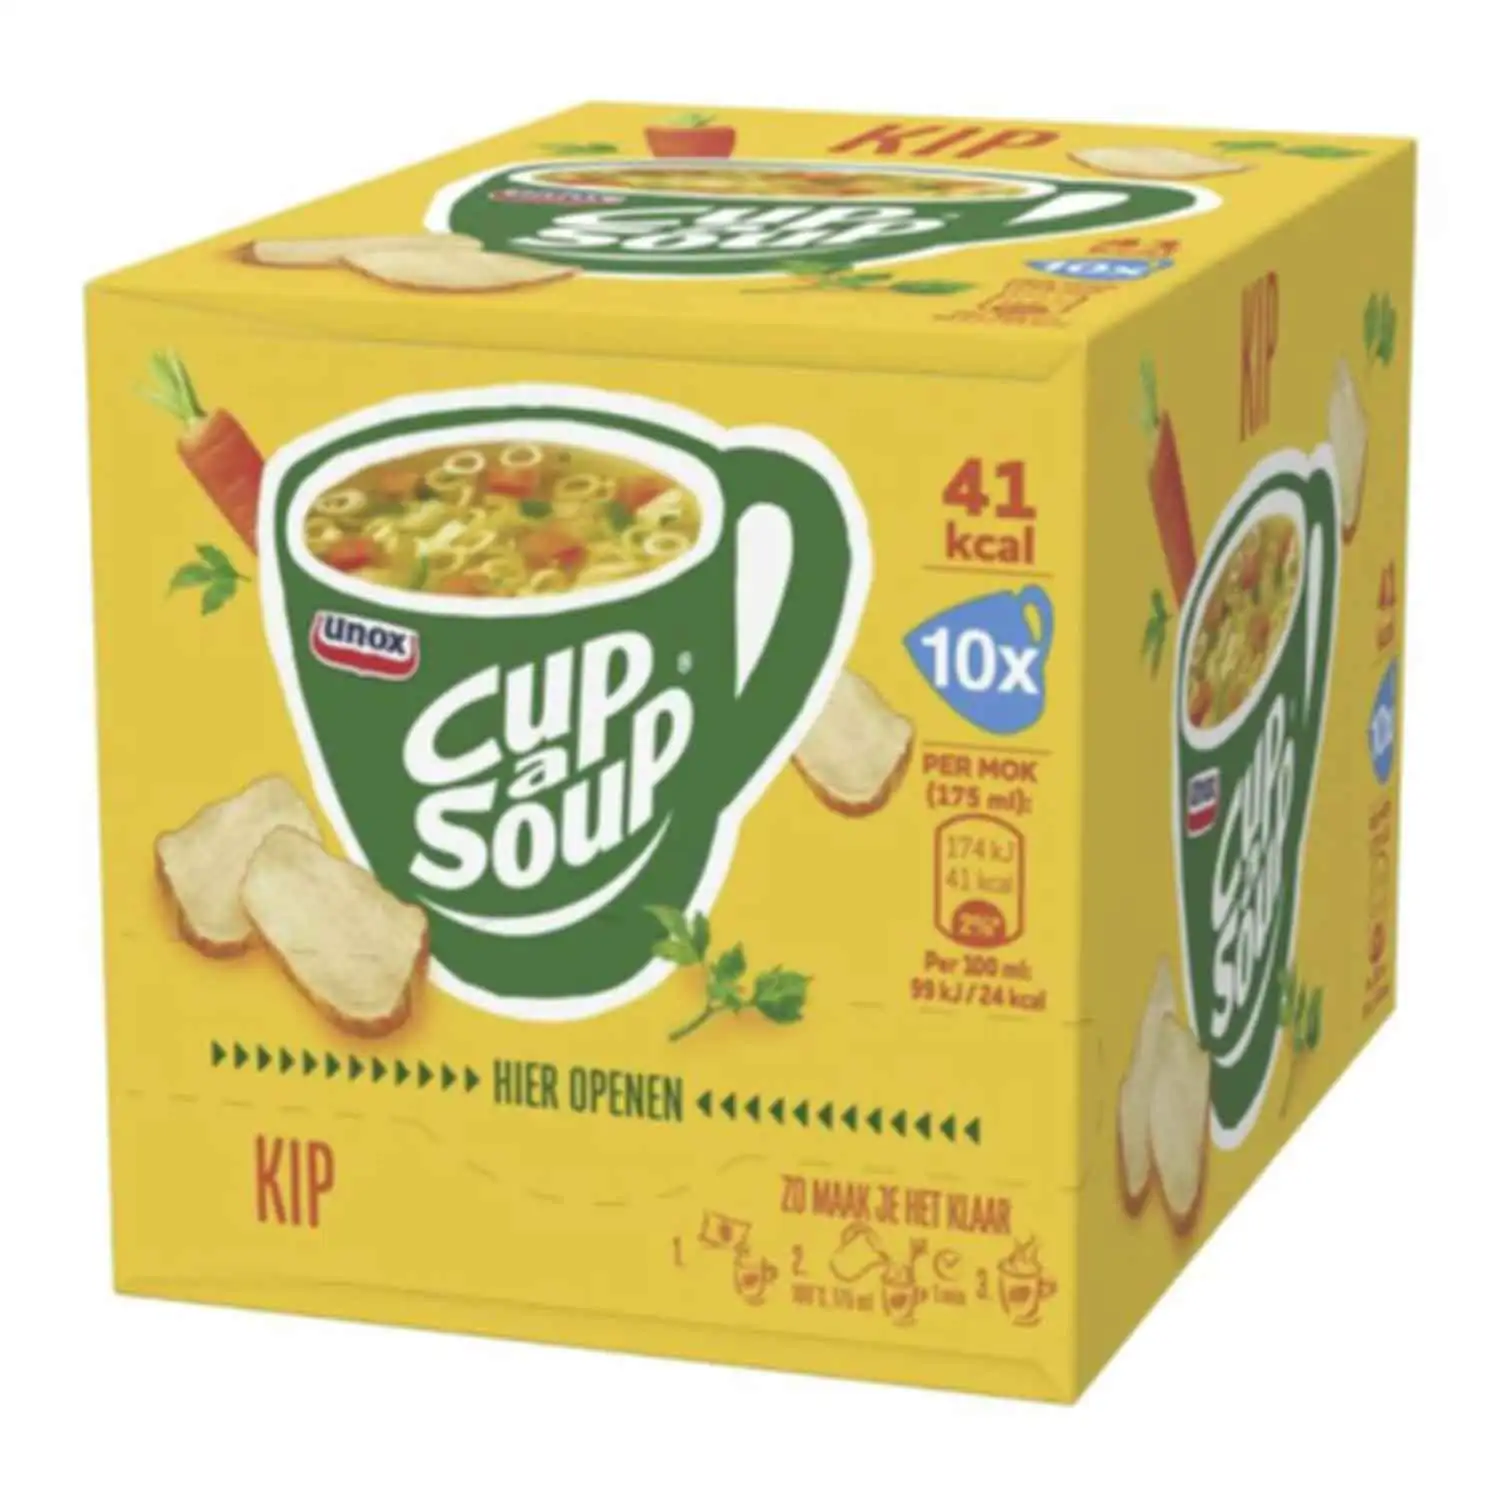 10x Cup a Soup chicken 12g - Buy at Real Tobacco